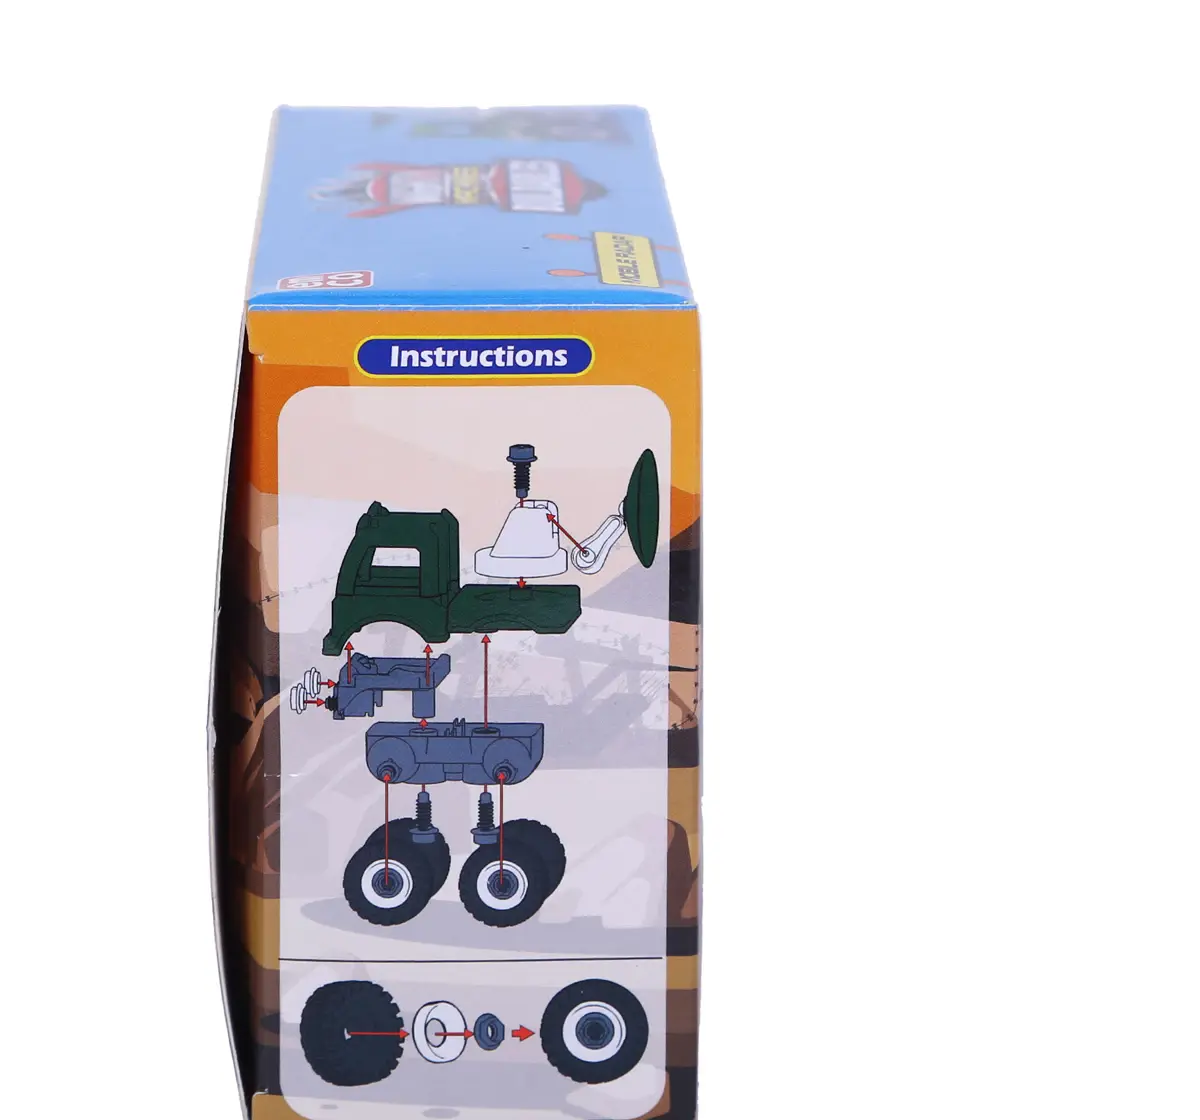 Mighty Machines Mobile Radar Construction Vechile for kids 3Y+, Multicolour